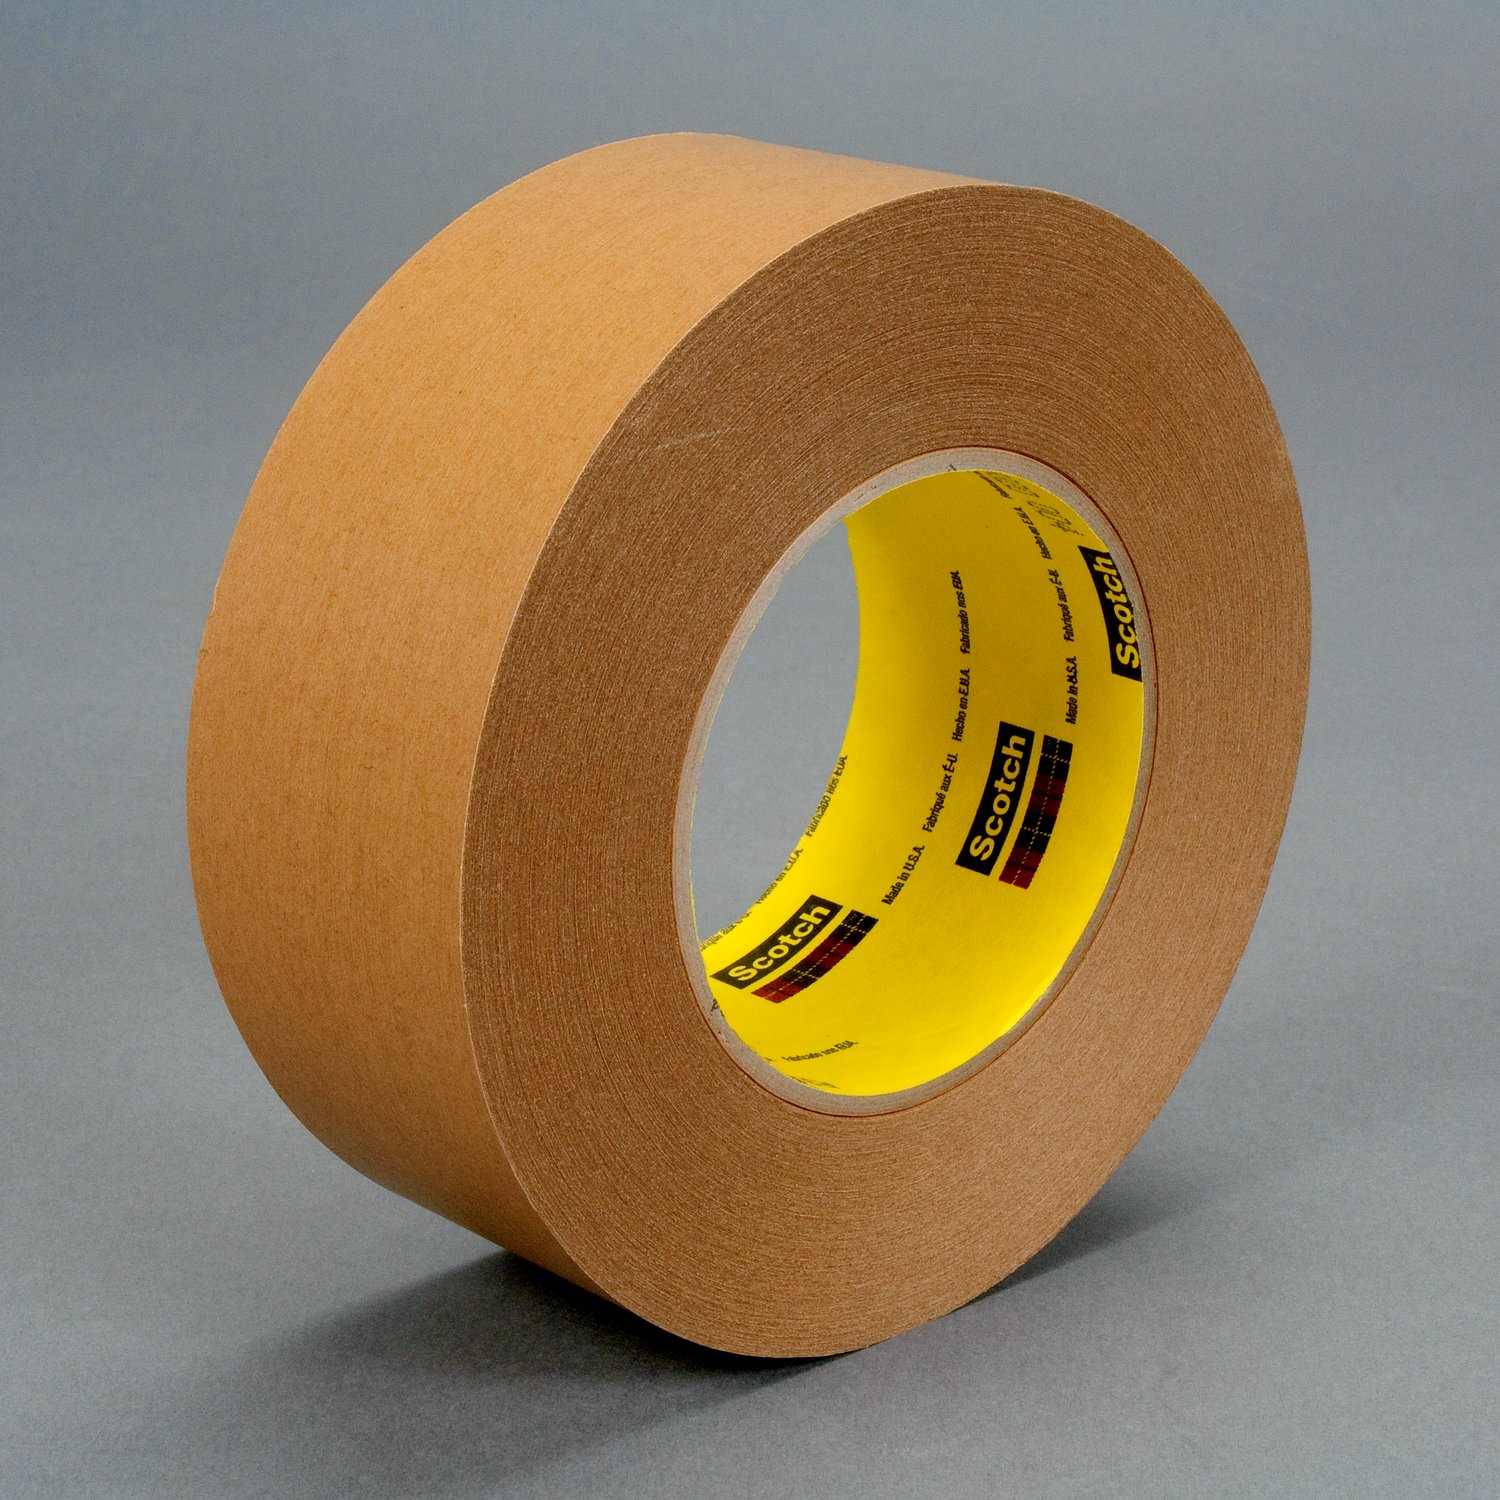 7100028029 - 3M Repulpable Strong Single Coated Tape R3187, Kraft, 48 mm x 55 m, 7.5
mil, 24 rolls per case